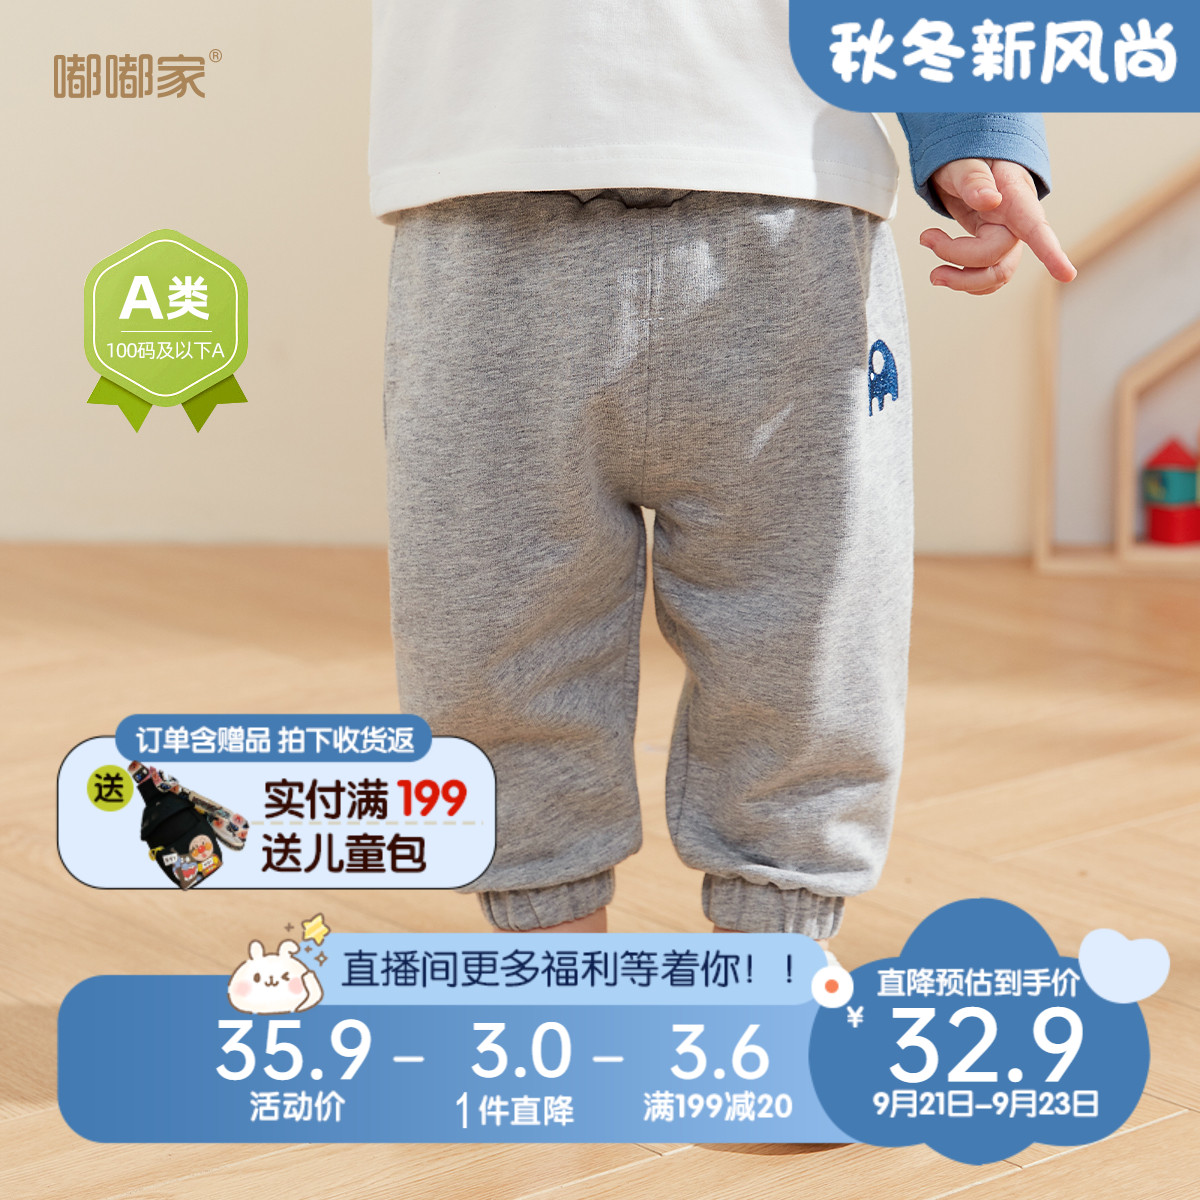 Boys' pants, baby autumn clothing, children's new children's clothing, girls' sports pants, spring and autumn pants, baby casual PP pants